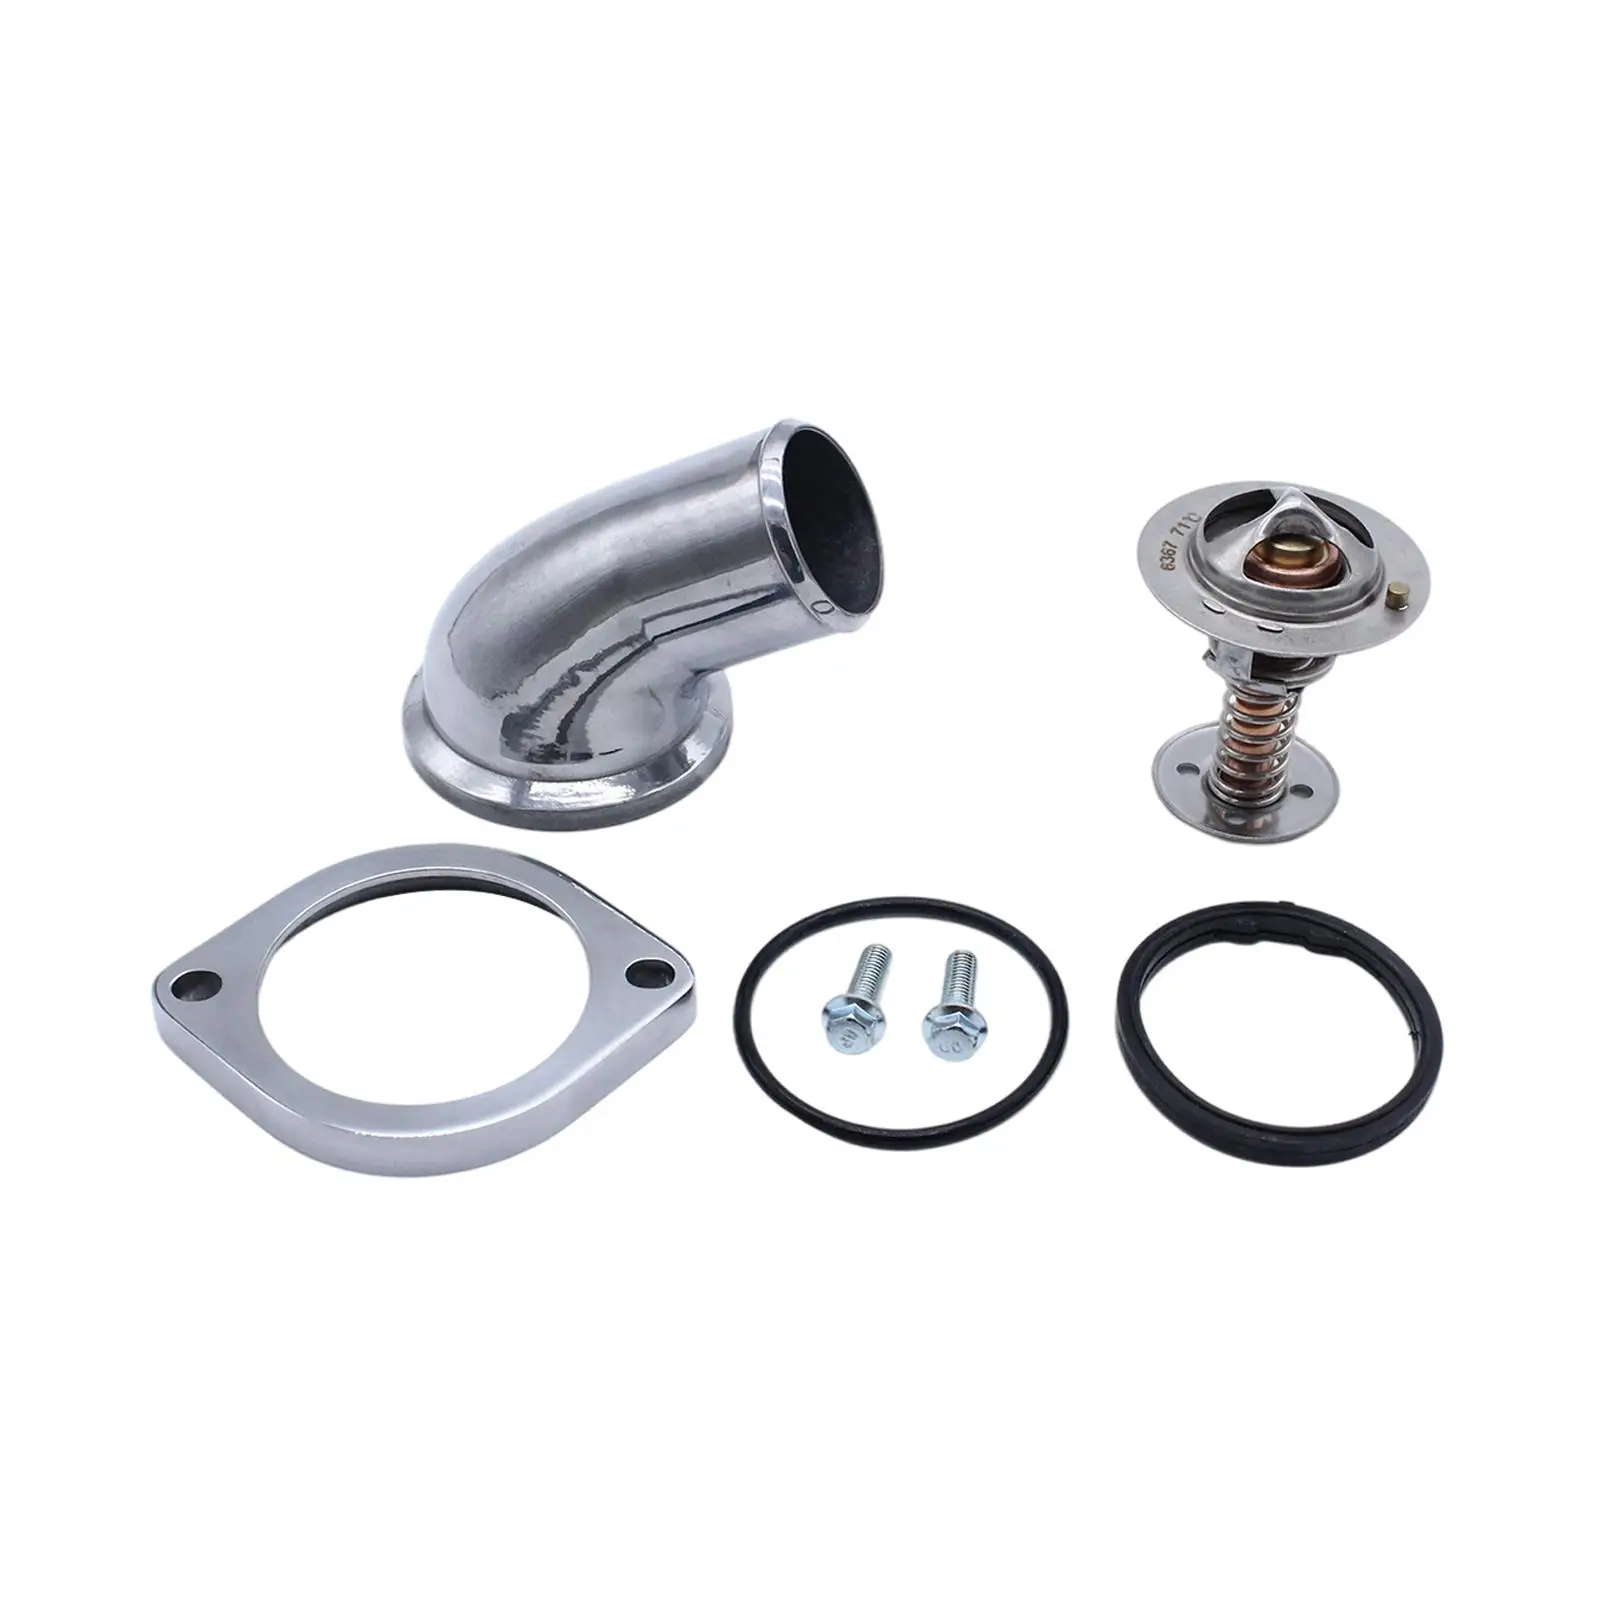 Automobile 45  Water Neck   Housing Chrome Aluminium Fit for  V8 (Ls-Based) Replaces Durable Accessories Spare Parts